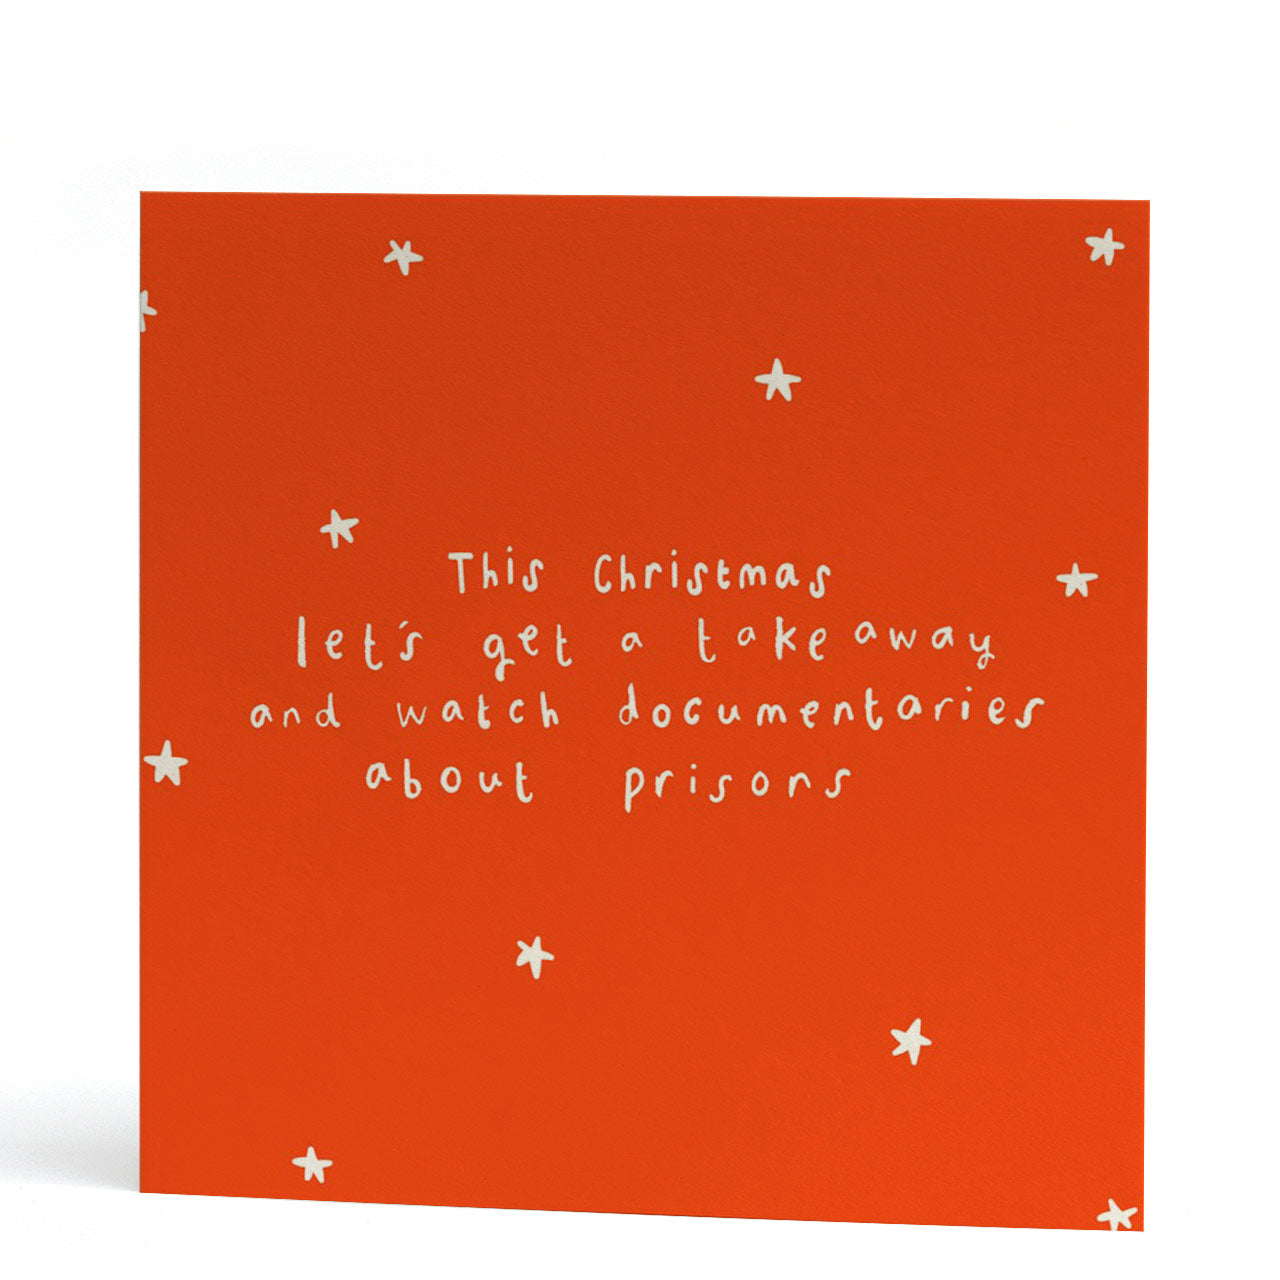 Documentaries About Prisons Christmas Card